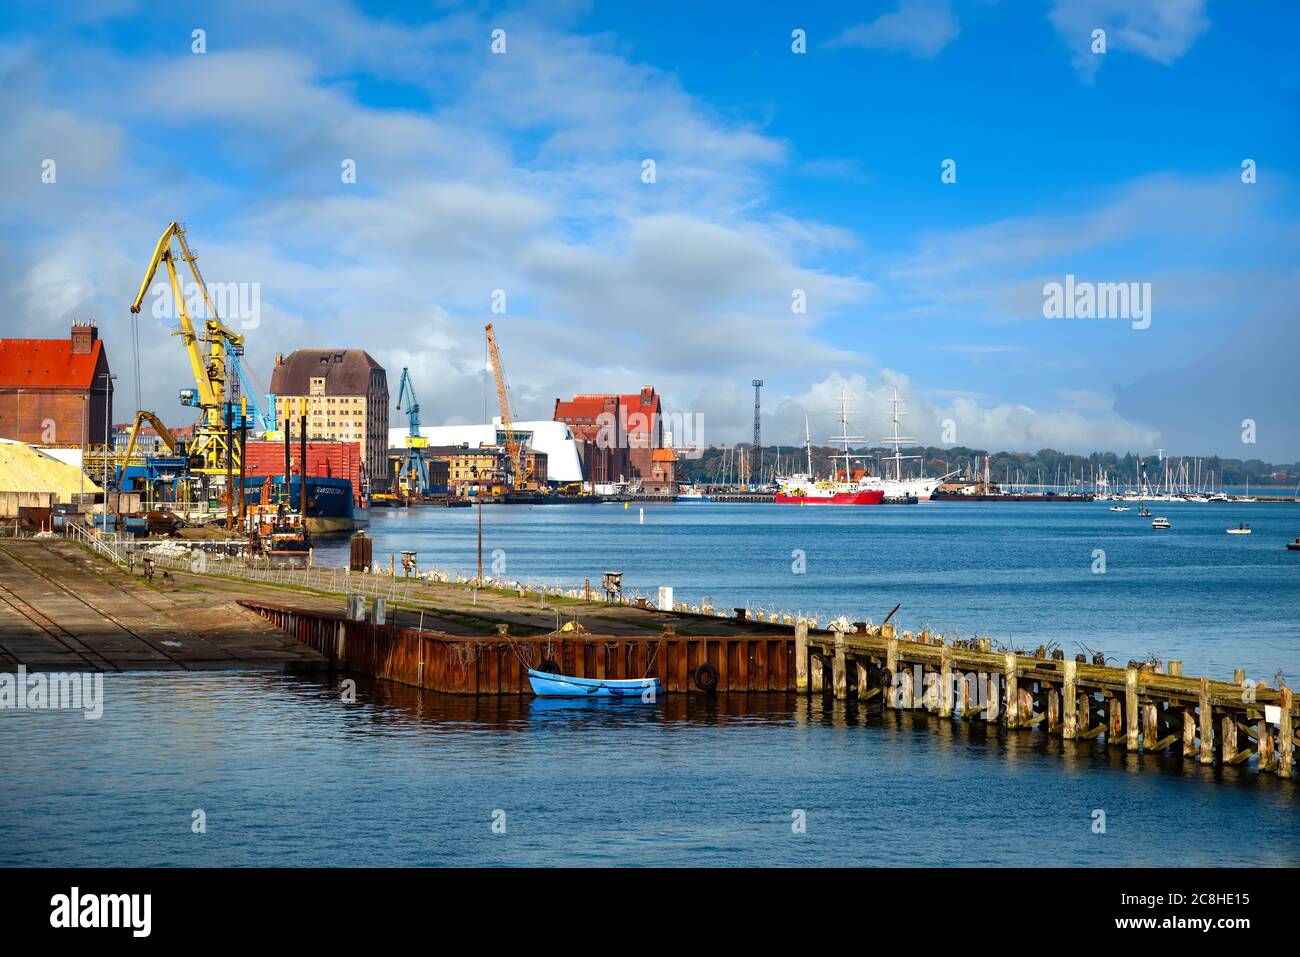 Panoramic view of the commercial harbor of Stralsund with cranes, ships and industrial buildings Stock Photo